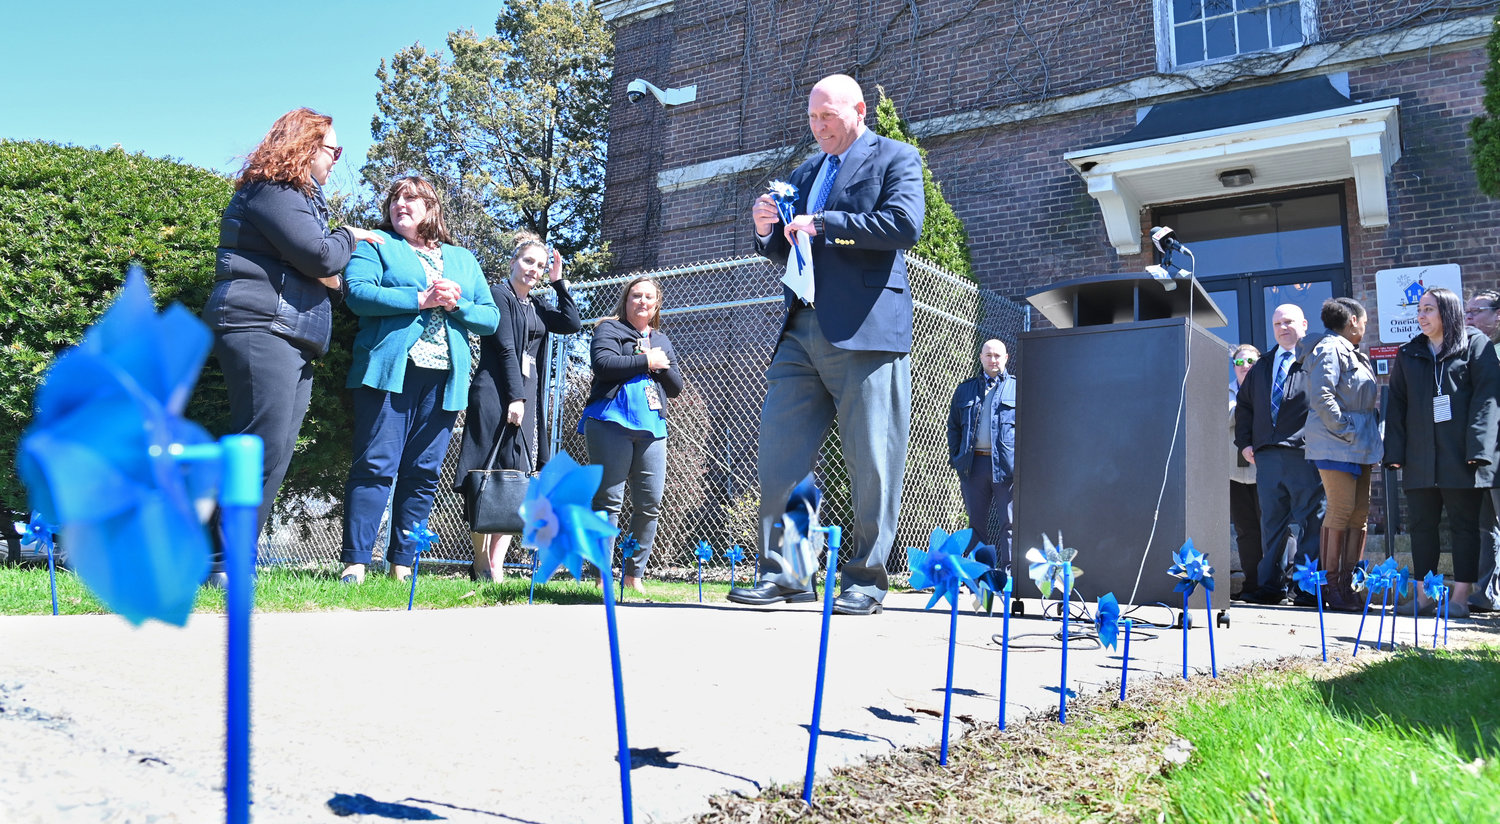 WINDY DAY — Blue and white pinwheels spin in the wind outside the Oneida County Child Advocacy Center in Utica on Thursday. County leaders take time every April to spread awareness of the facility’s work, placing pinwheels in the ground as a symbol.